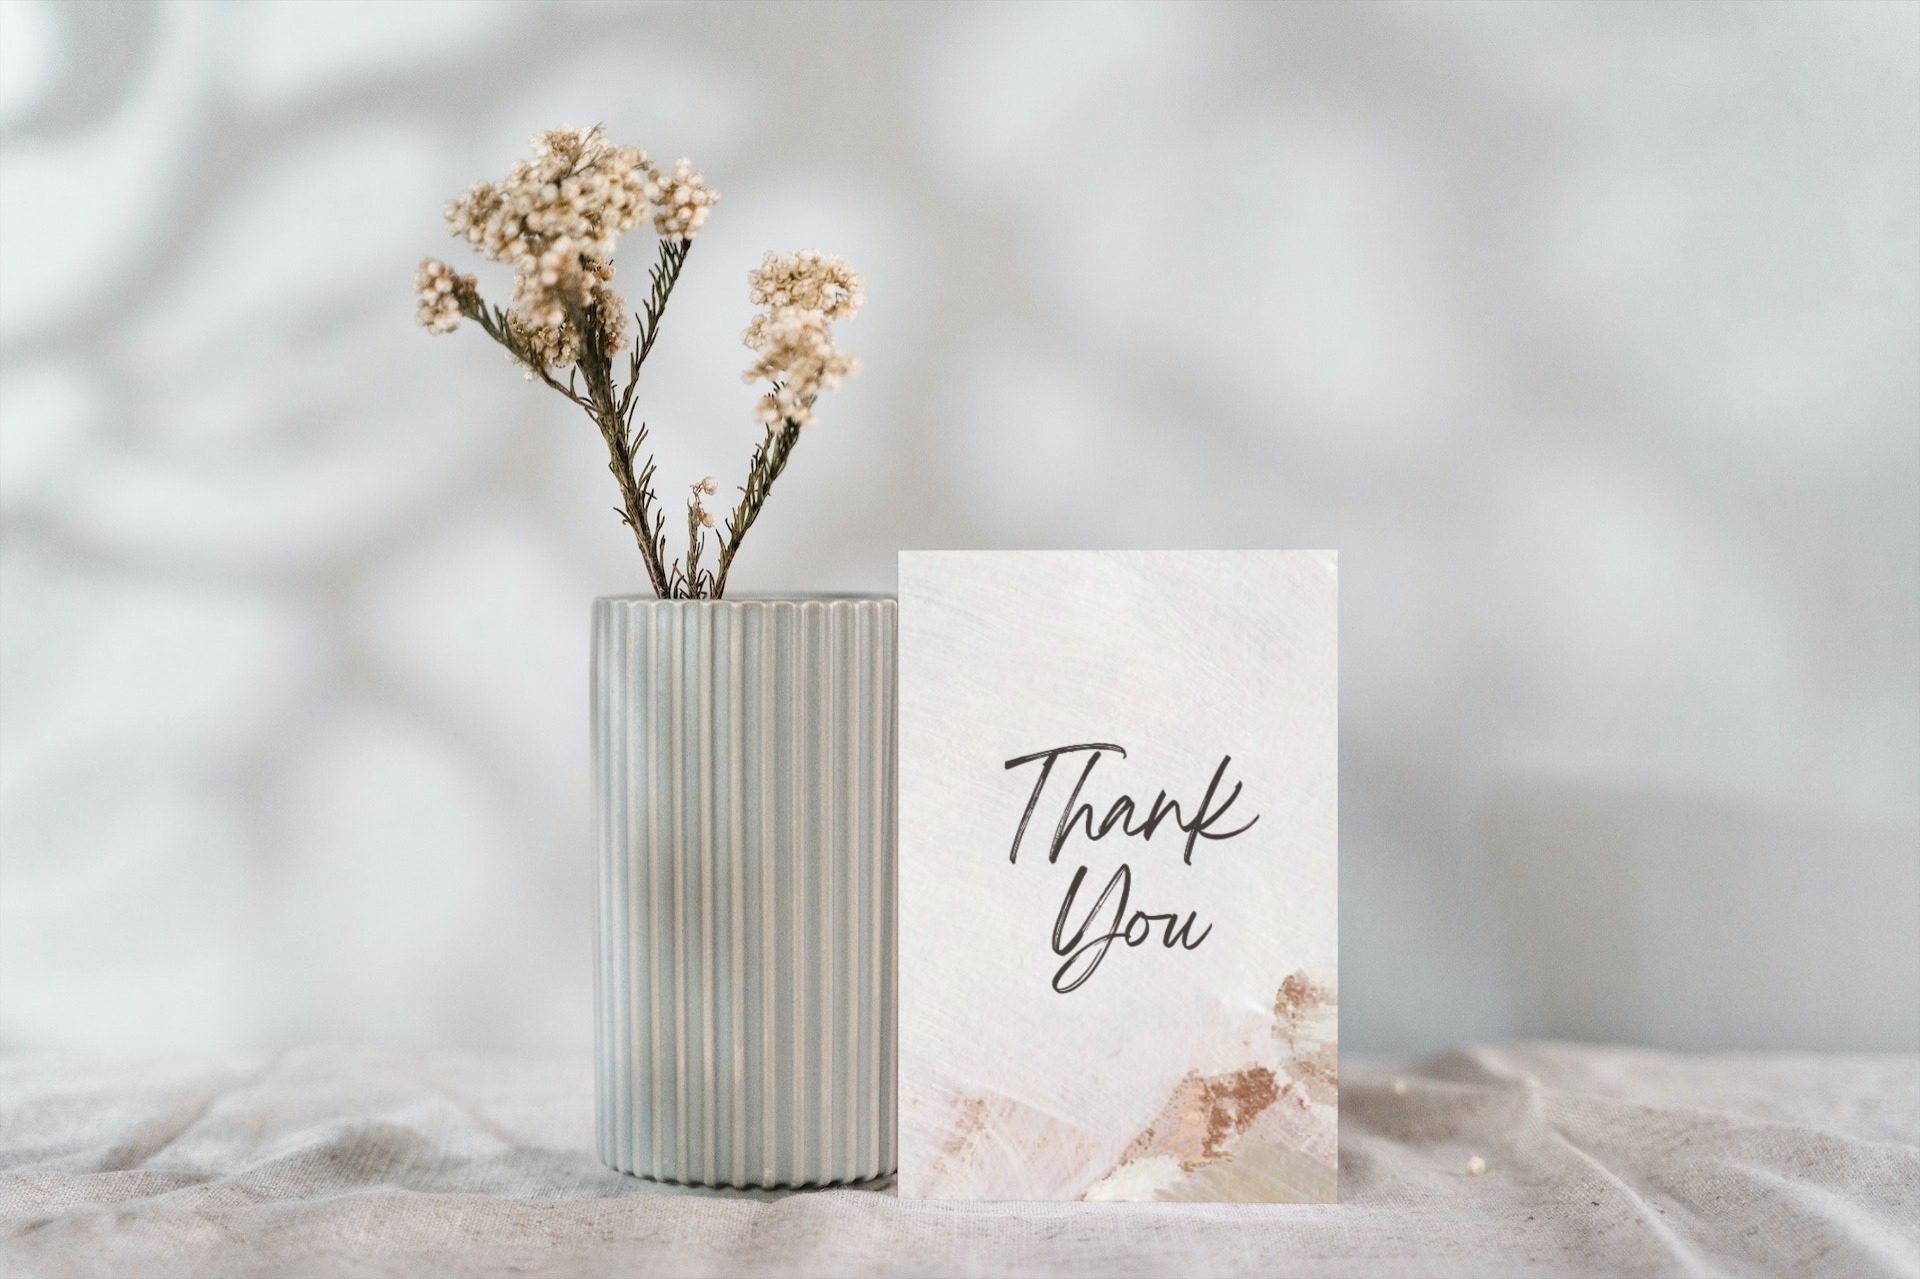 Realtor Thank You Card To Buyer - Design 2 (with greeting)